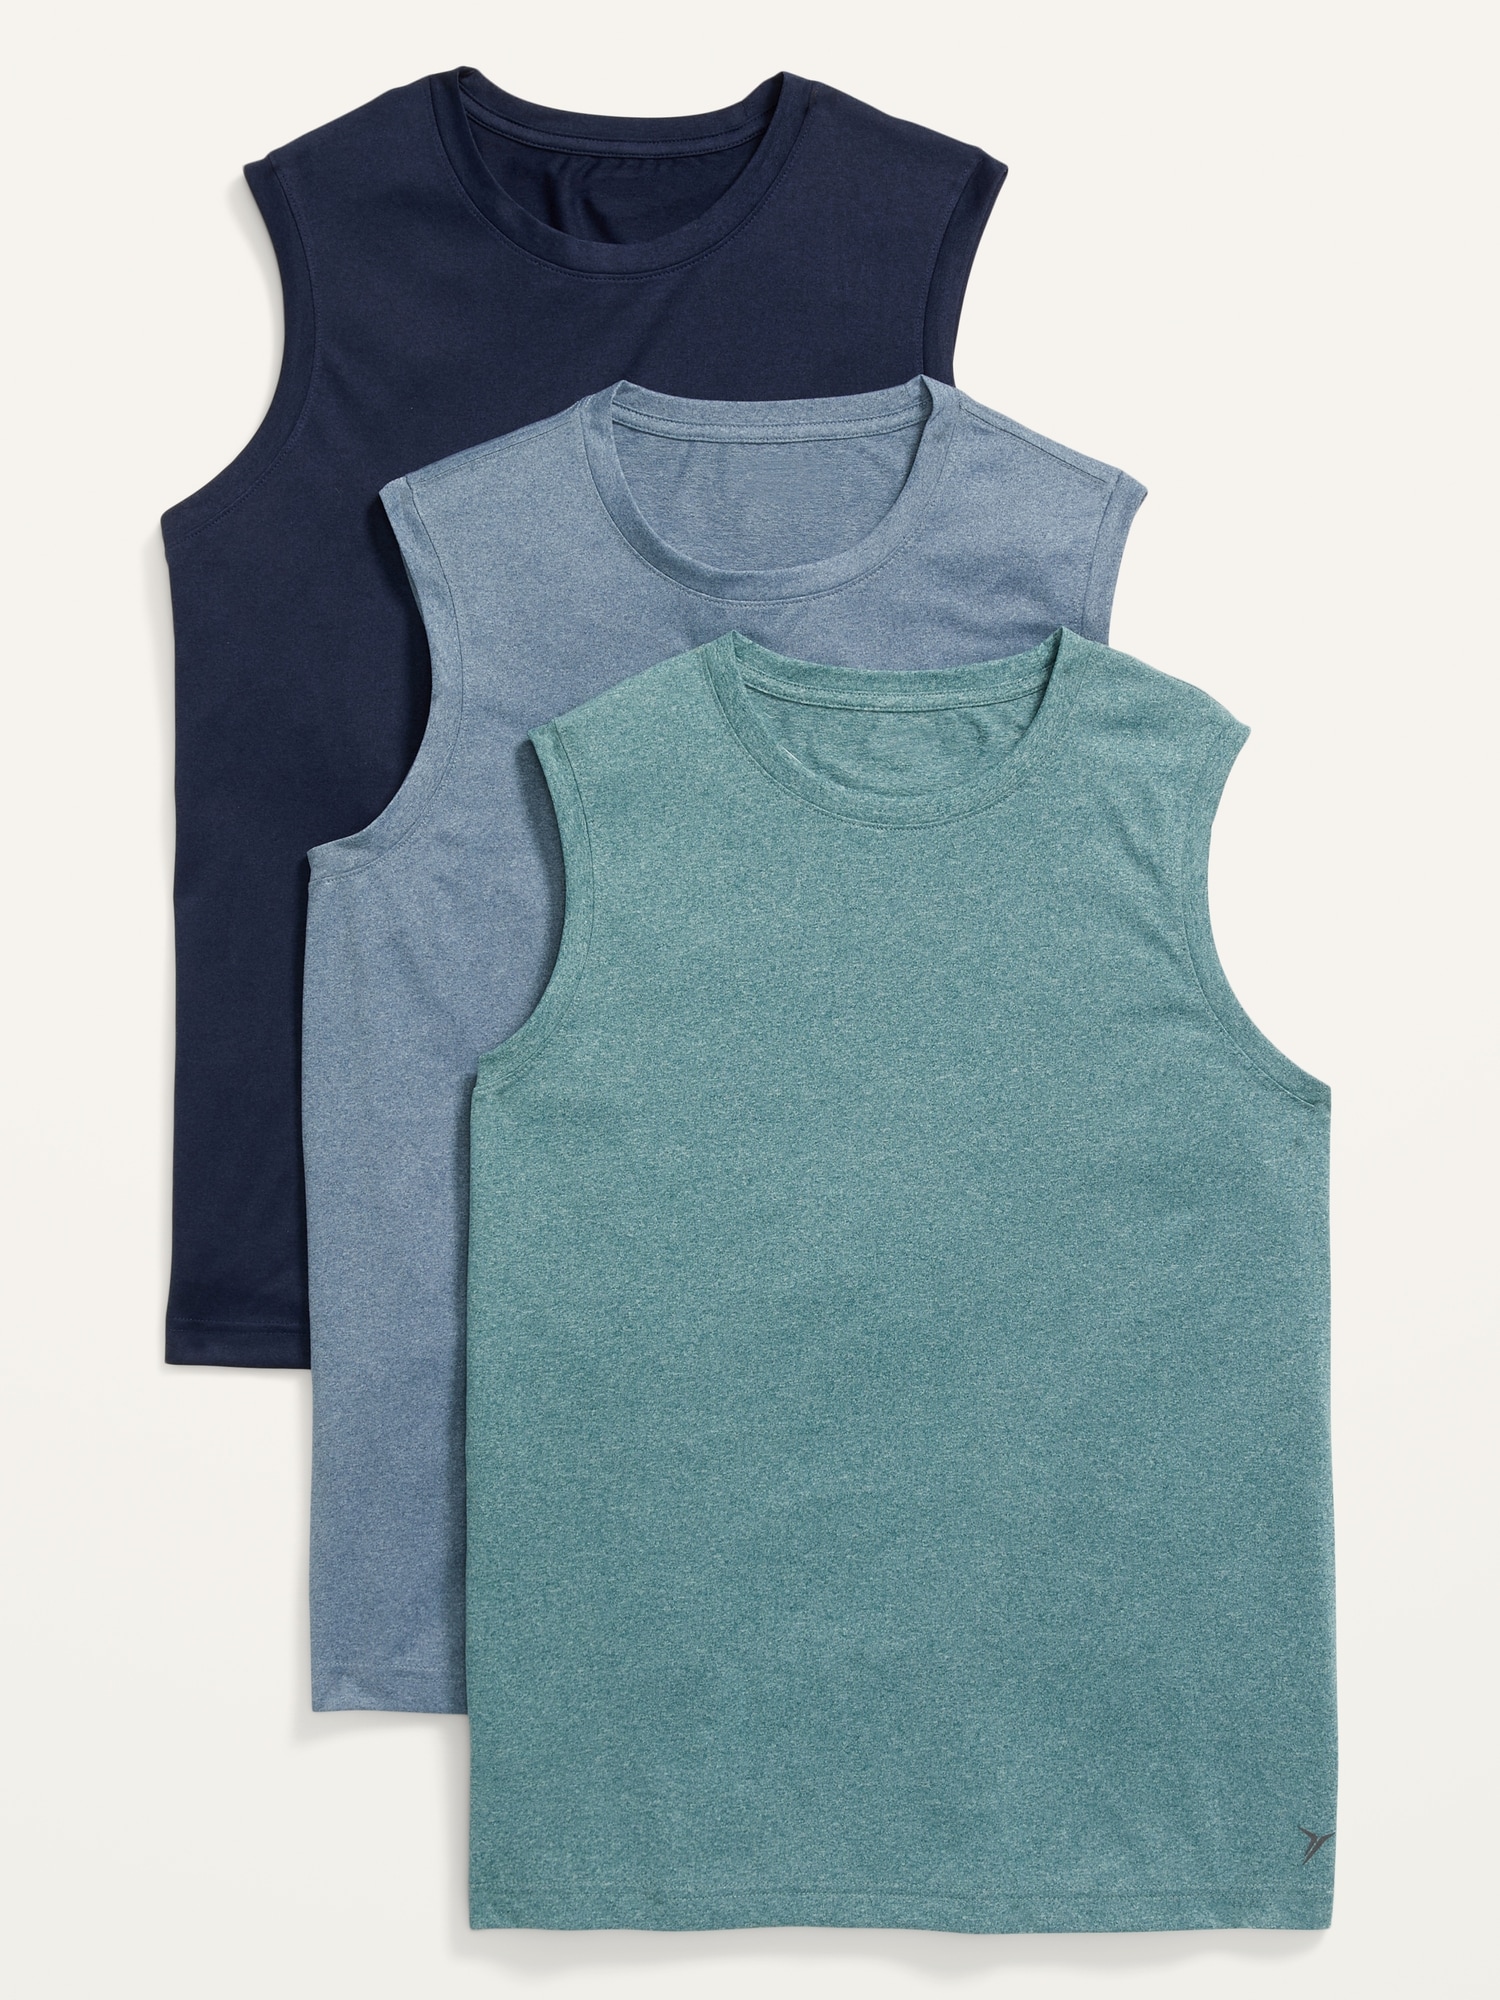 Sleeveless Go-Dry Cool Odor-Control Performance Core Tee 3-Pack for Men